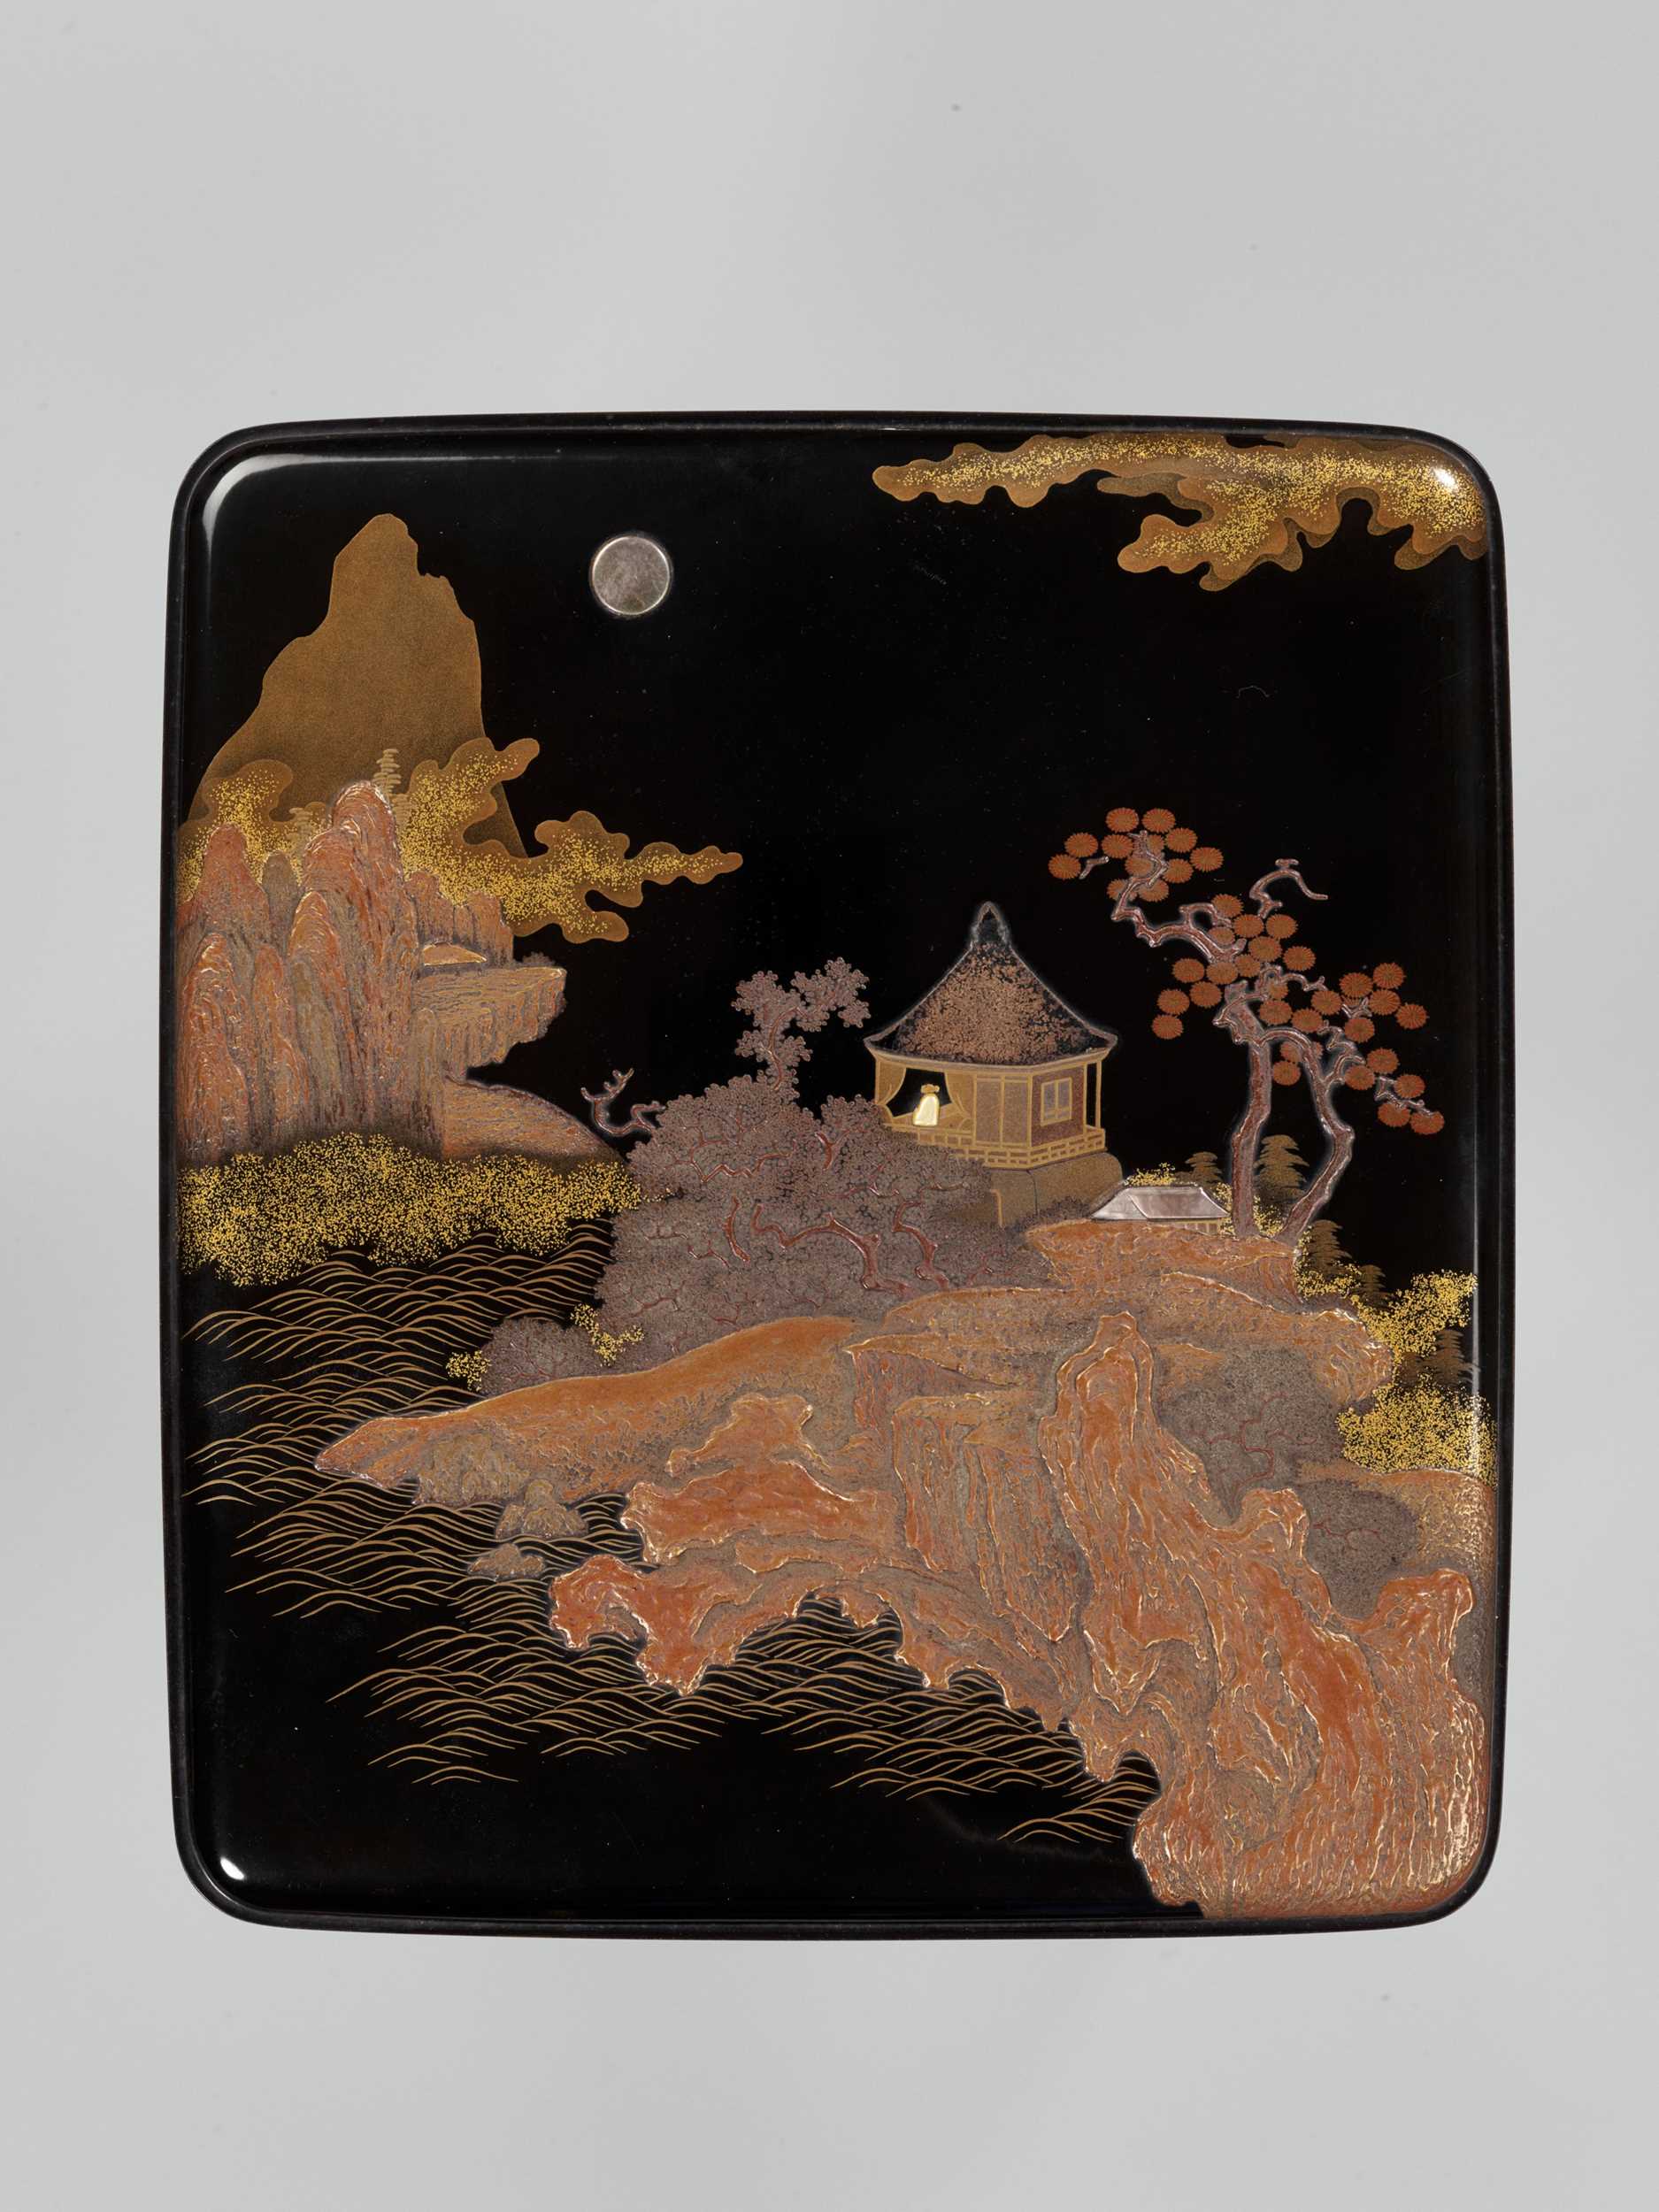 Lot 97 - A SUPERB SILVER-MOUNTED INLAID LACQUER SUZURIBAKO WITH A LANDSCAPE